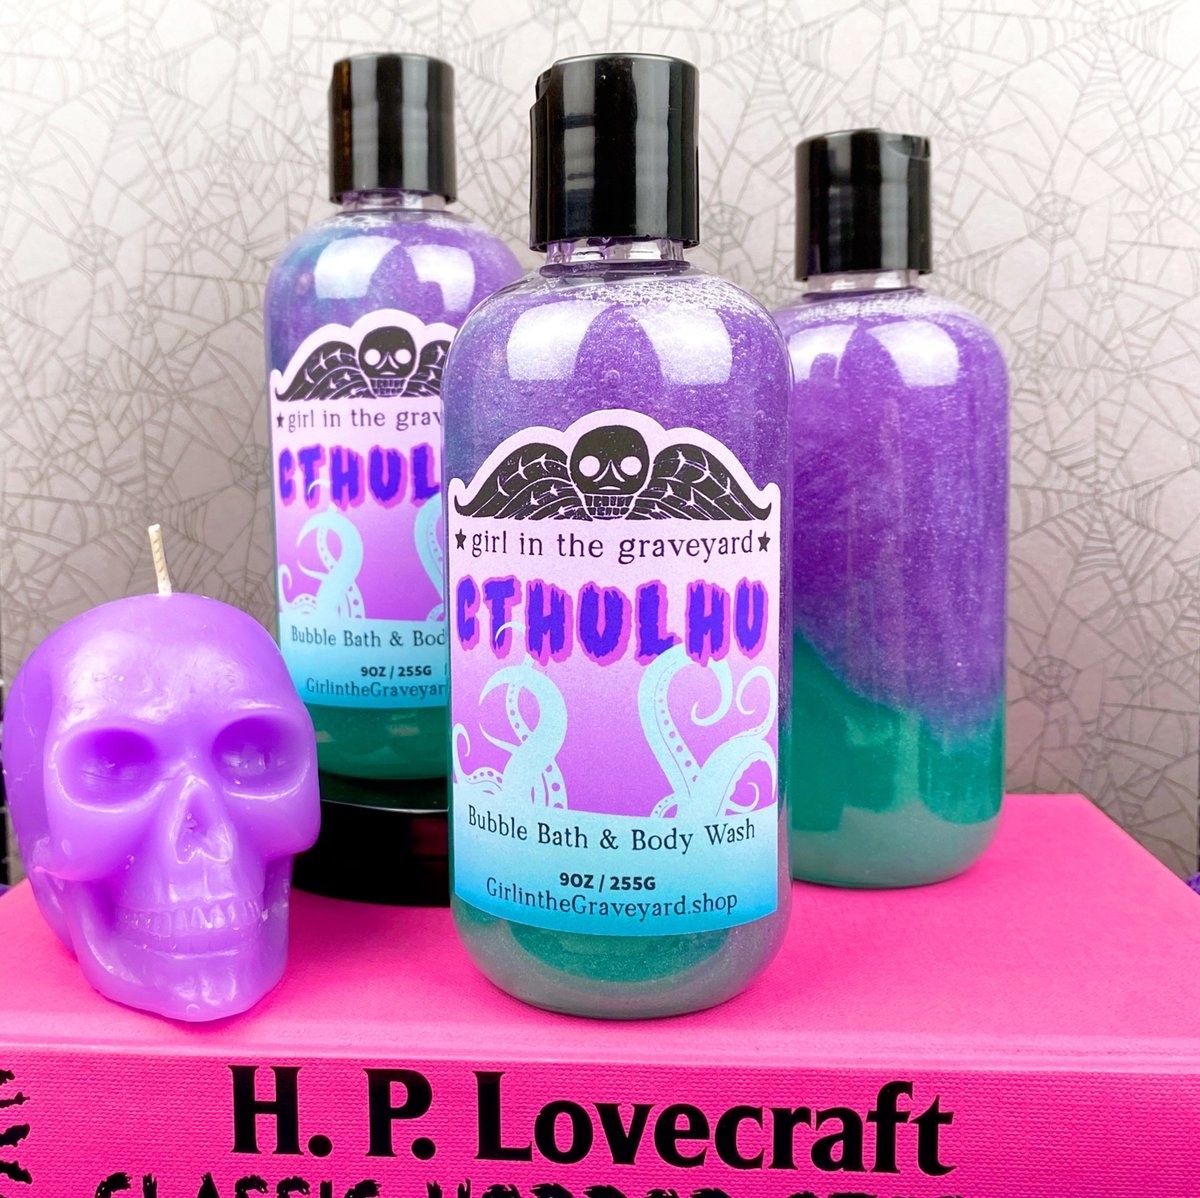 Three bottles of purple and green bubble bath and body wash that say &quot;Cthulhu&quot; on the label